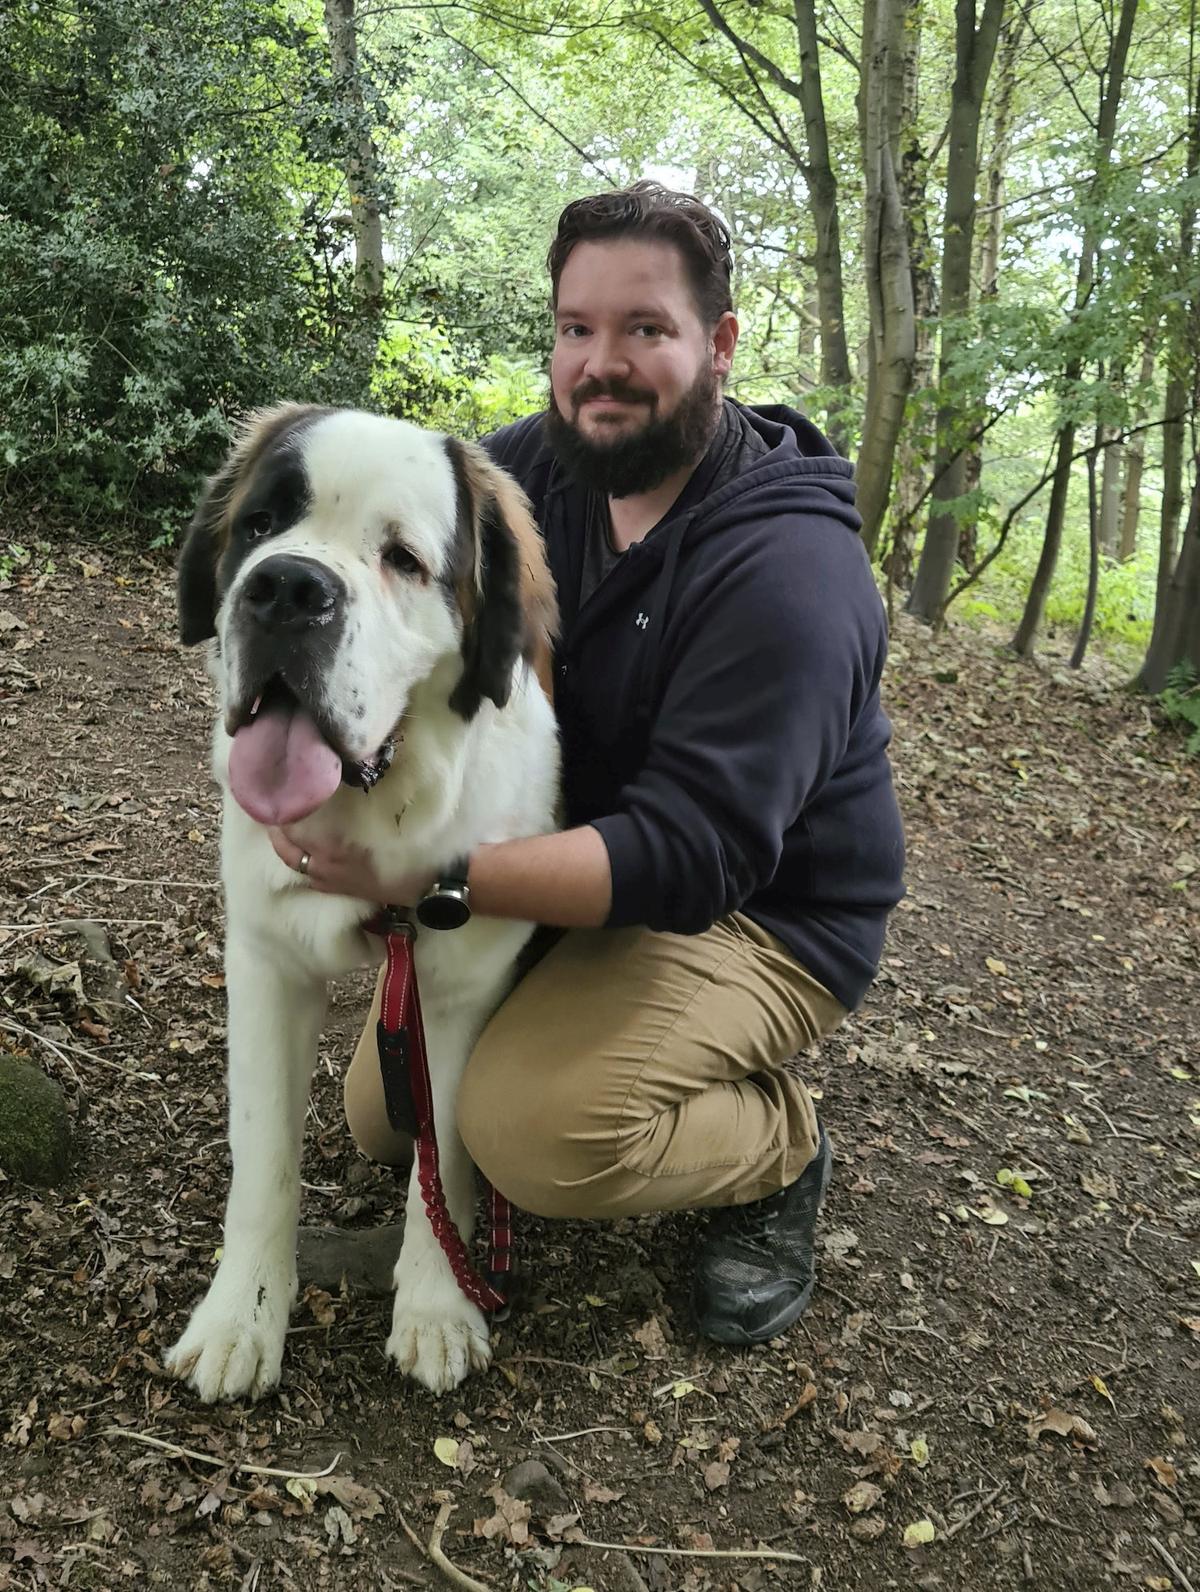 Samson the dog with owner Kyle Barrett. (SWNS)